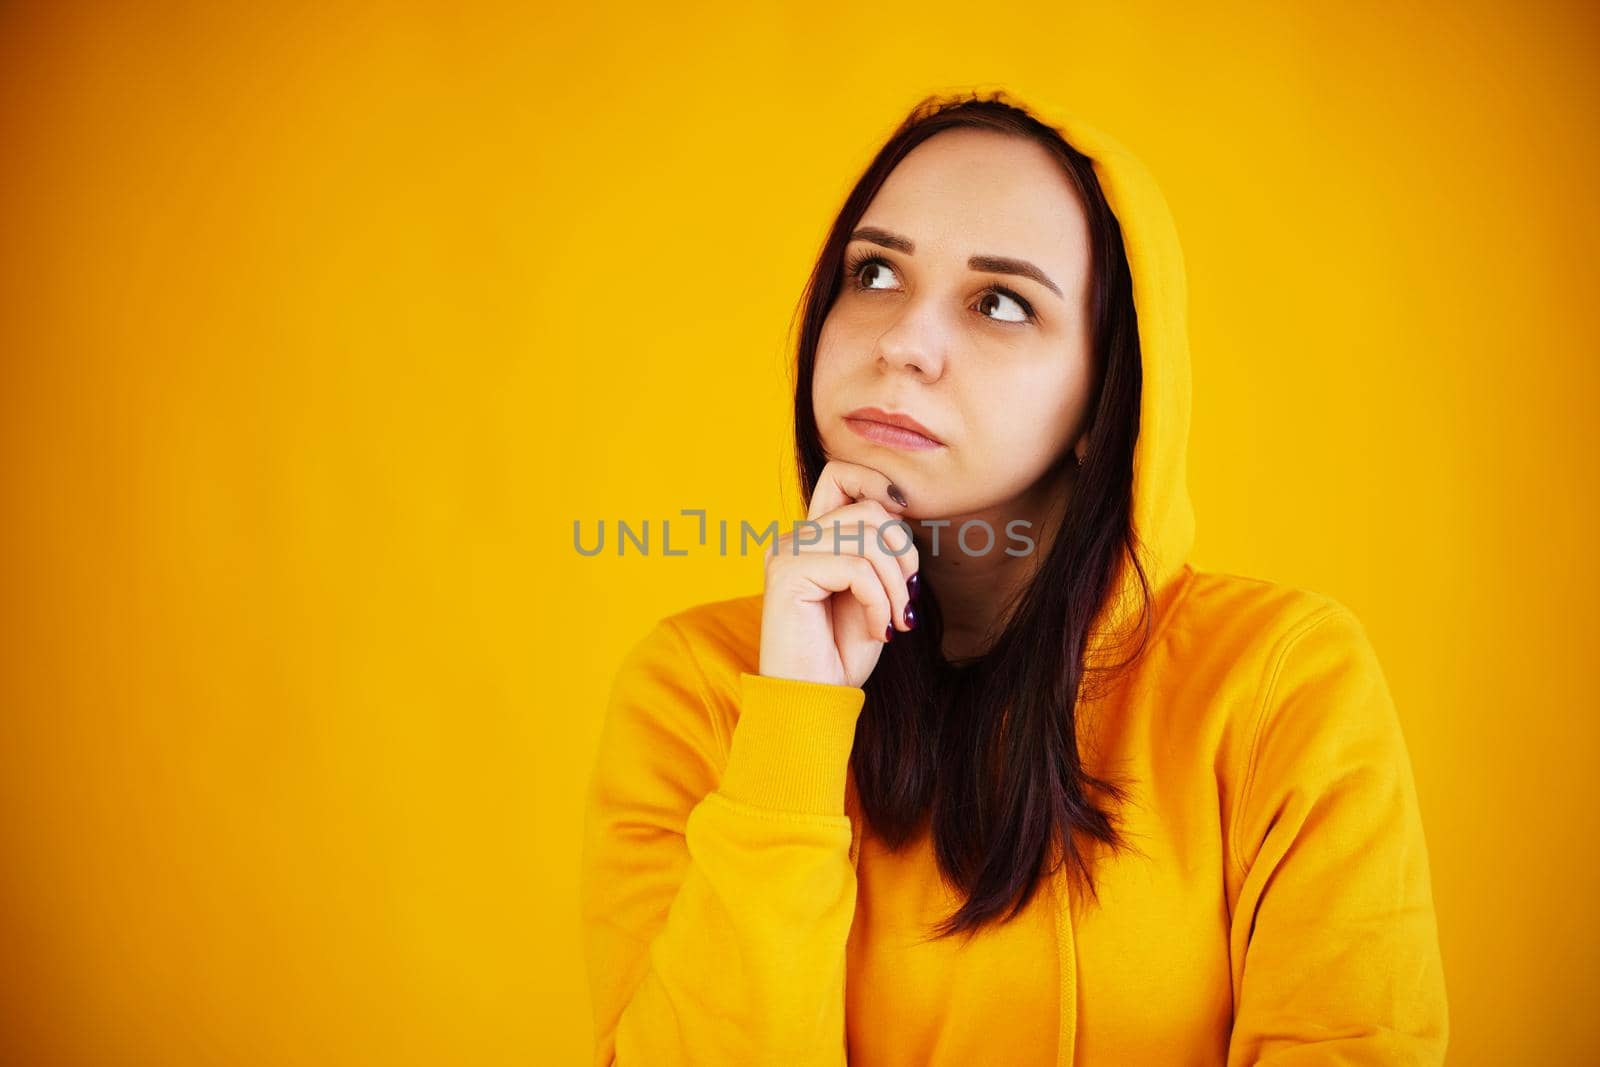 Portrait of young woman on yellow background. Pretty brunette in yellow hoodie posing on bright background